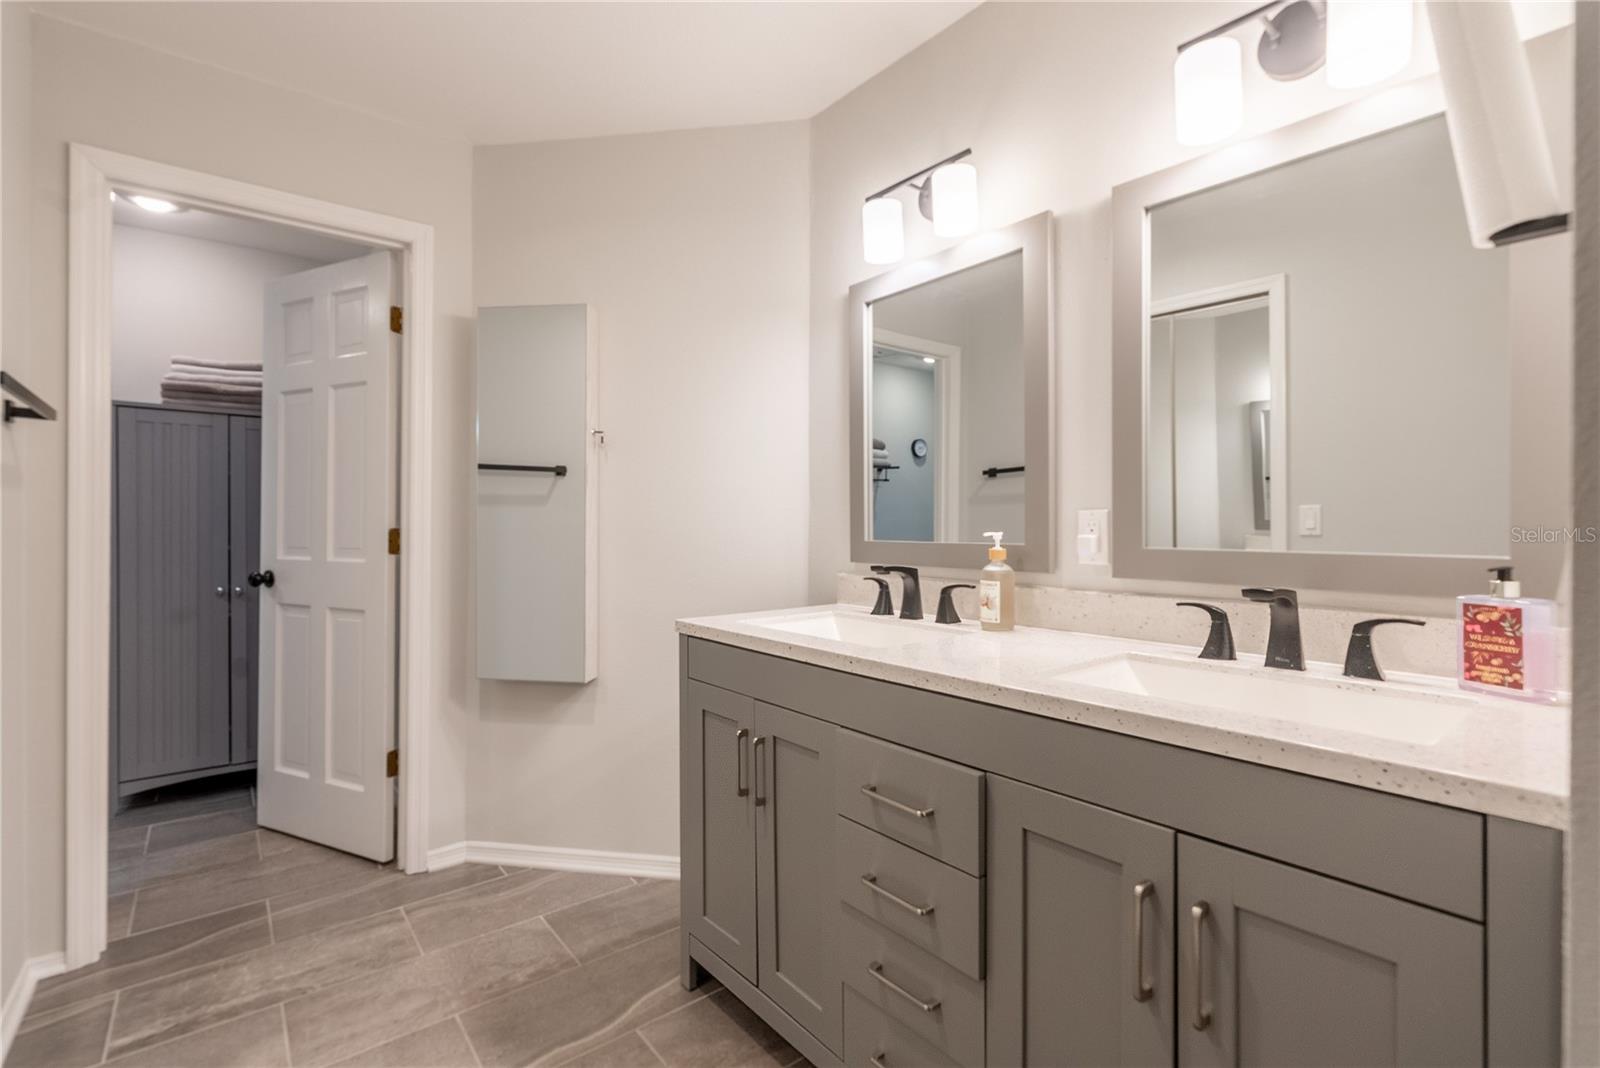 The primary bathroom has a double vanity, and a mirrored jewelry cabinet affixed to the wall